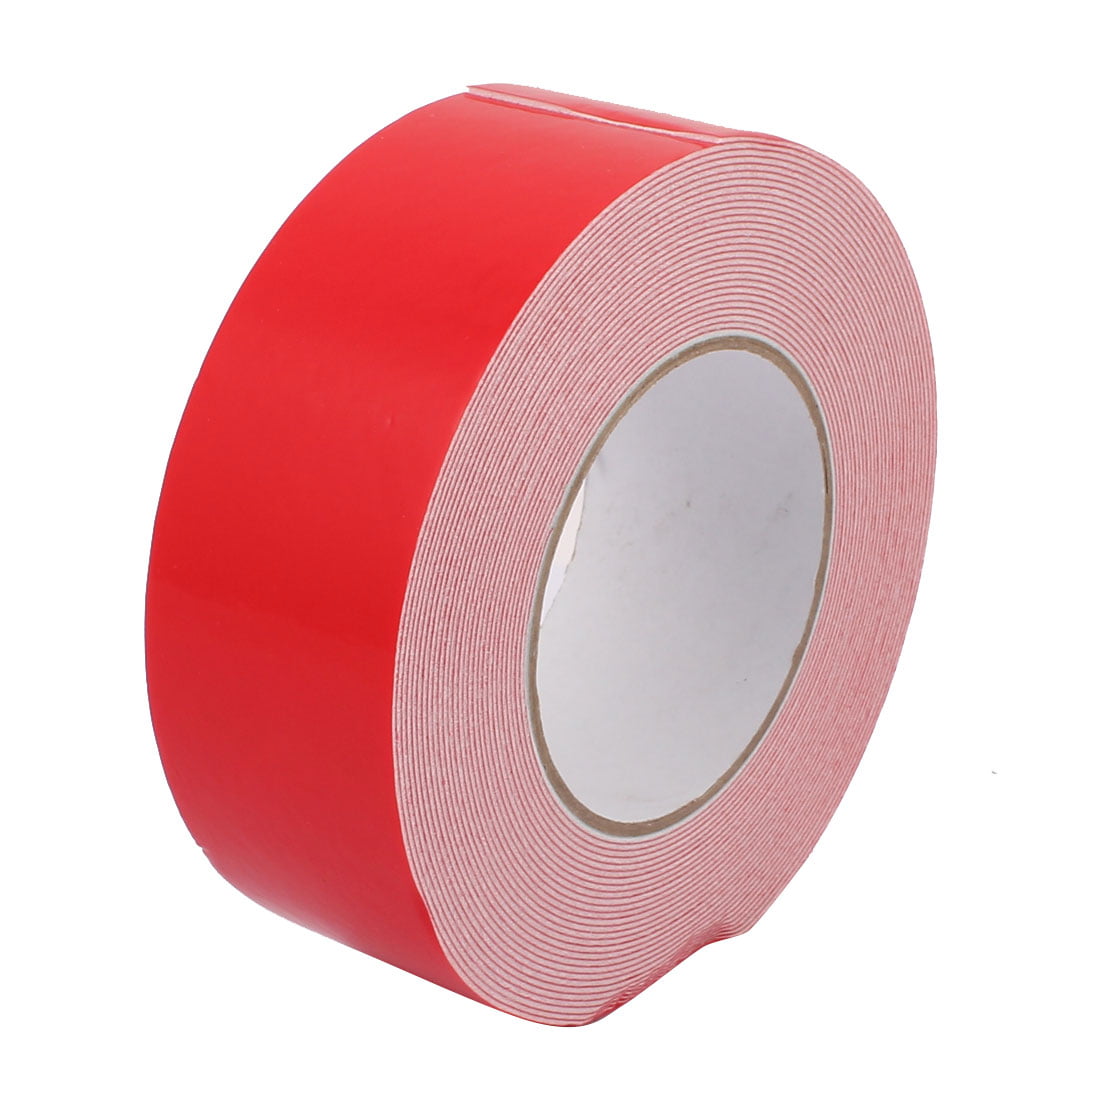 10 Metres Double Sided Self Adhesive Foam Craft Tape Padded Mounting BLACK 10m 